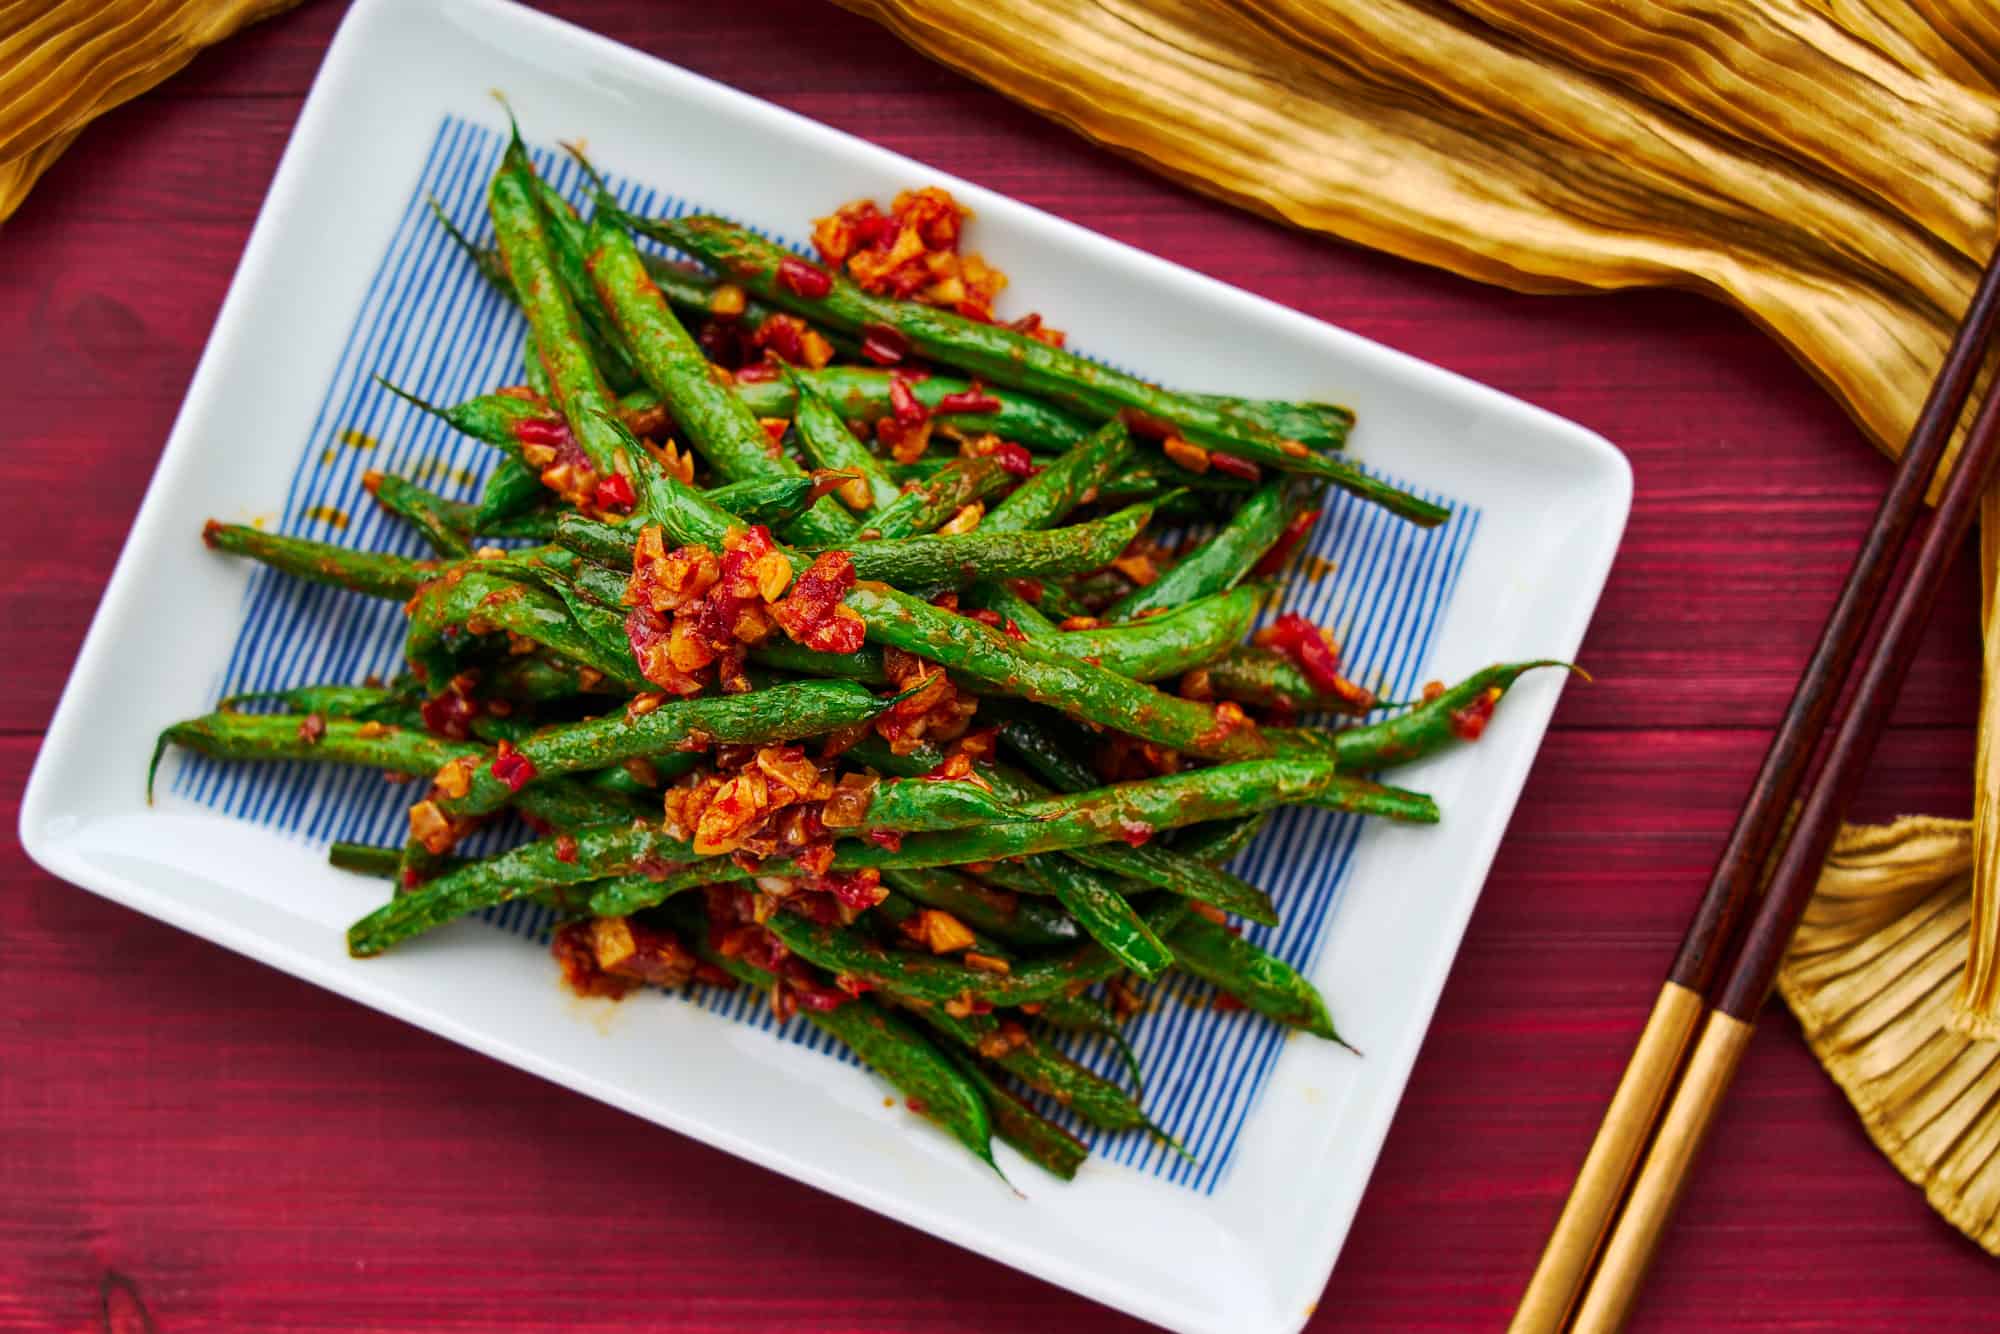 A plate of tender green beans stir-fried with chili paste and garlic. An easy vegan Chinese recipe.